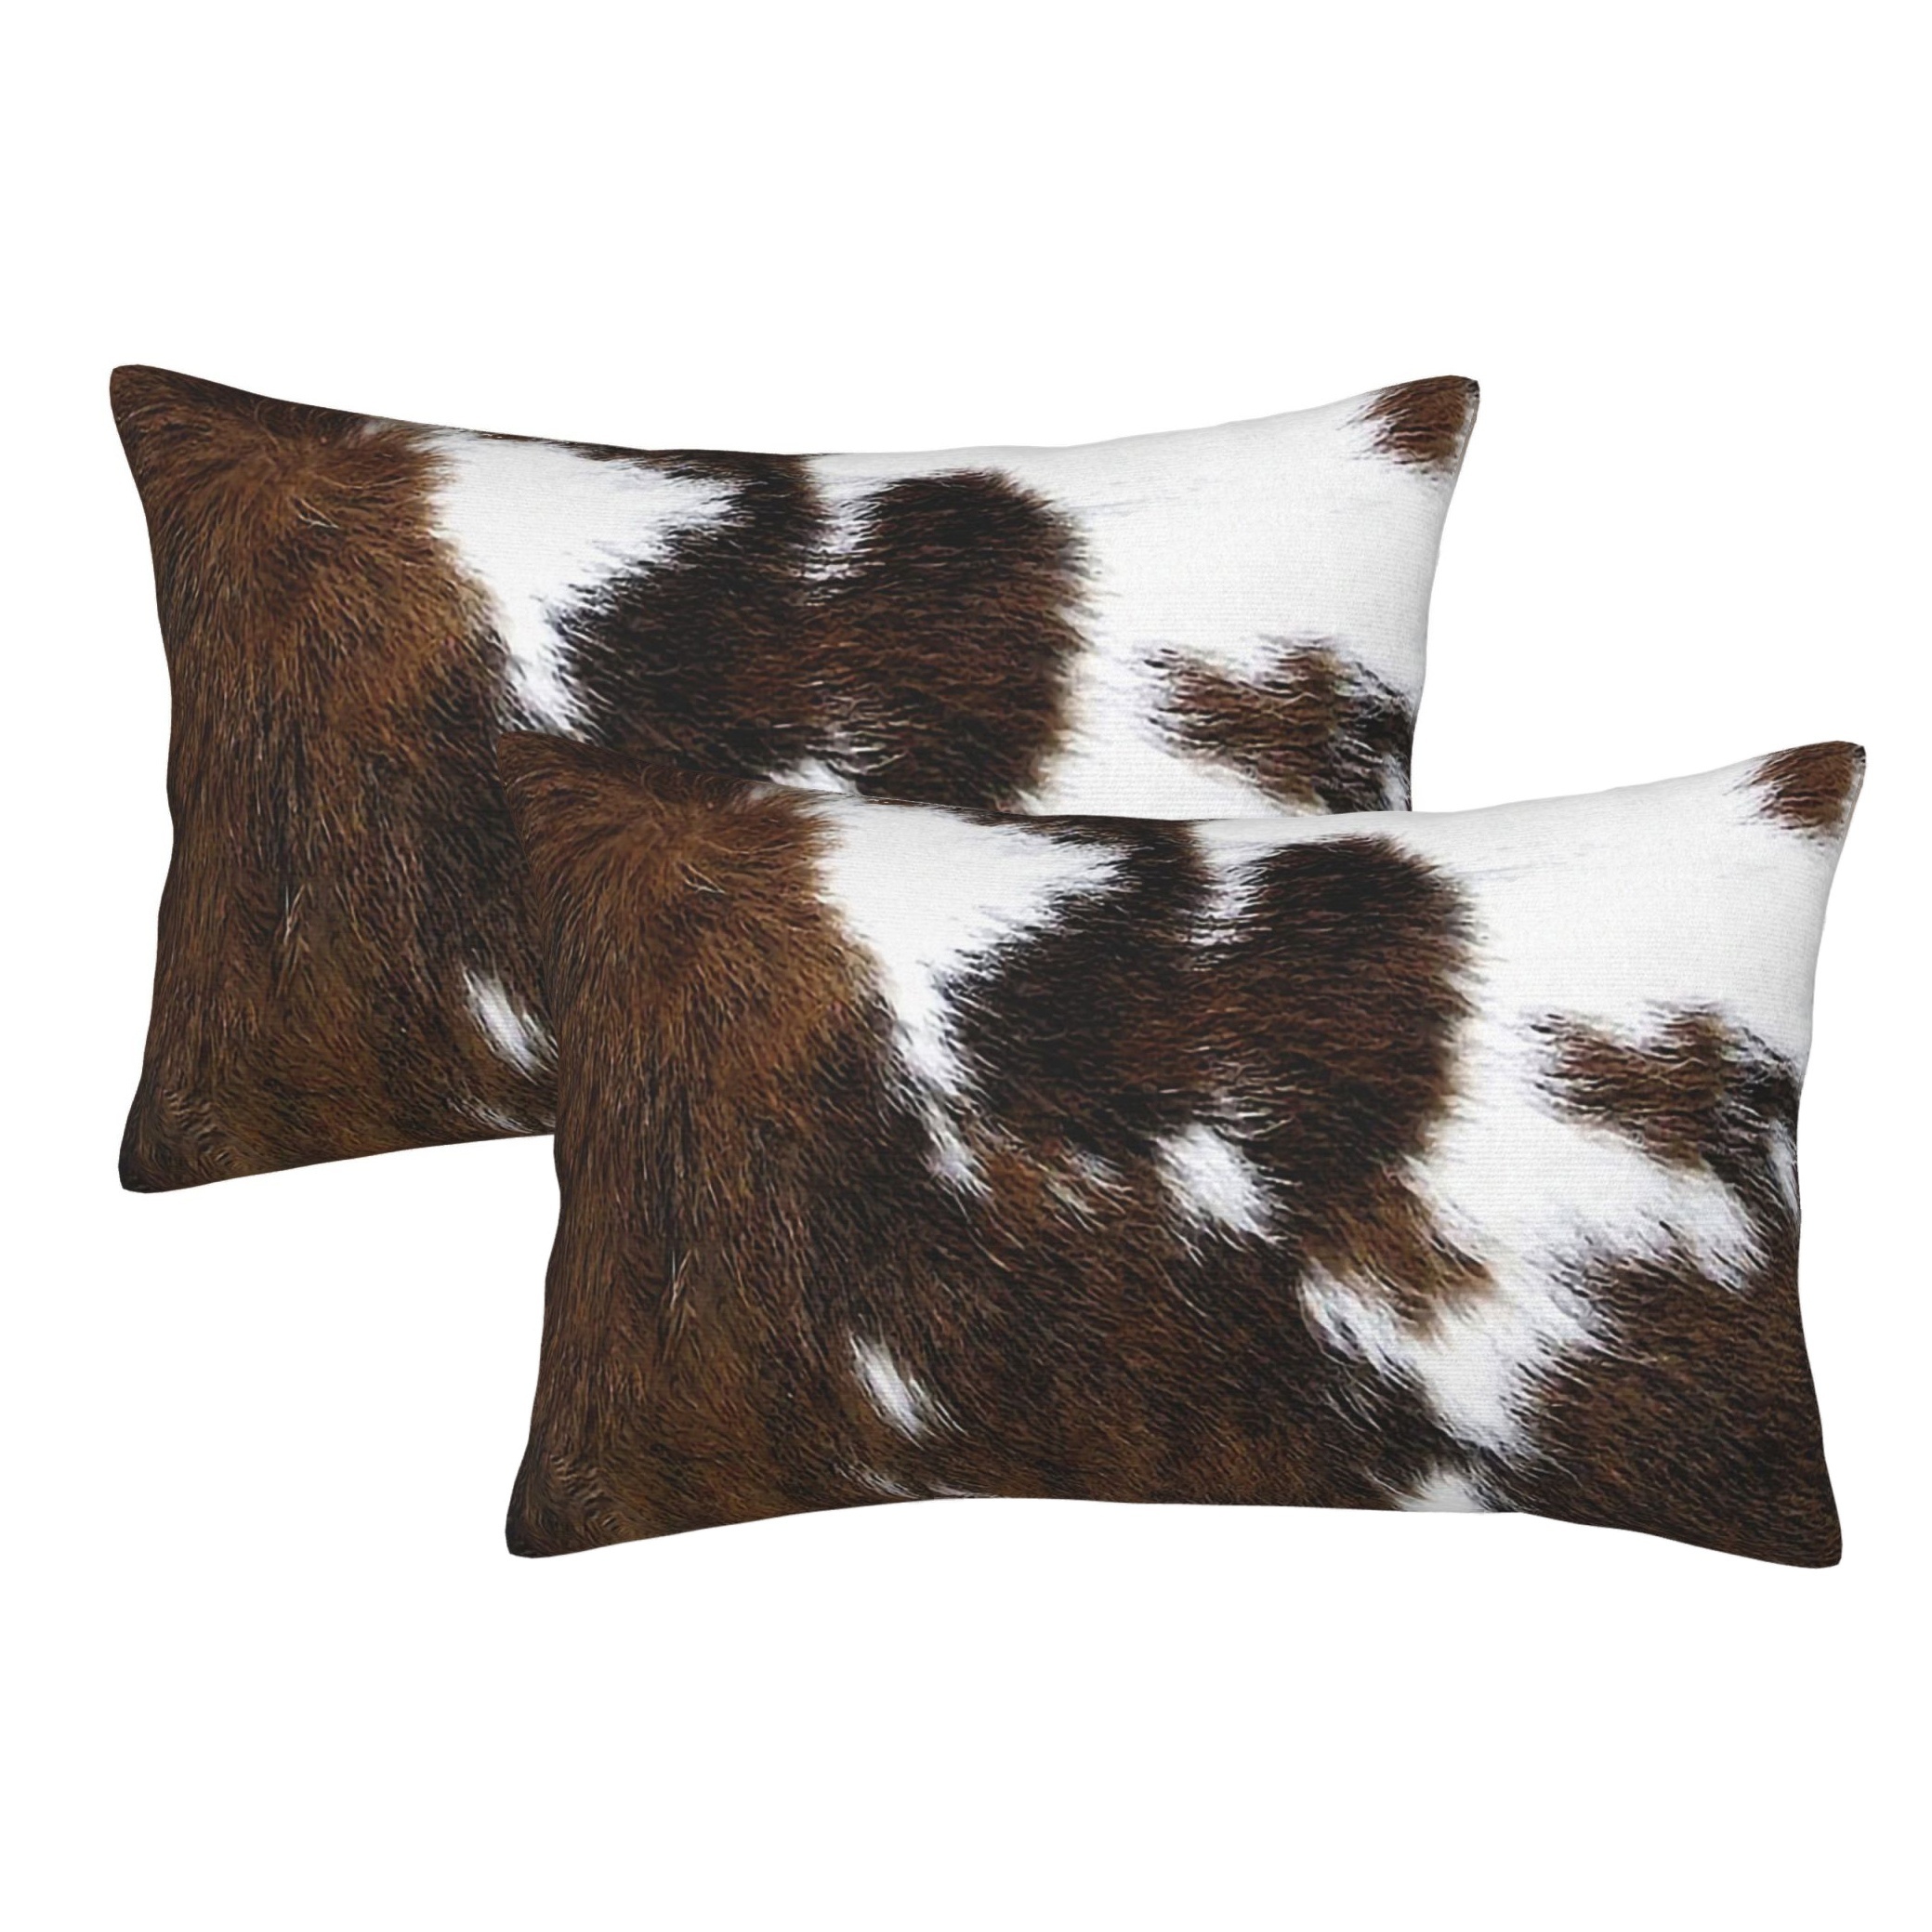 

2pcs Cowhide Animal Printed Short Plush Throw Pillow Covers, Black White And Brown Decorations Cushion Case, Chair Bedroom Living Room Sofa Couch Bed Outdoor Home Decor, No Pillow Core, 12 X 20 Inch